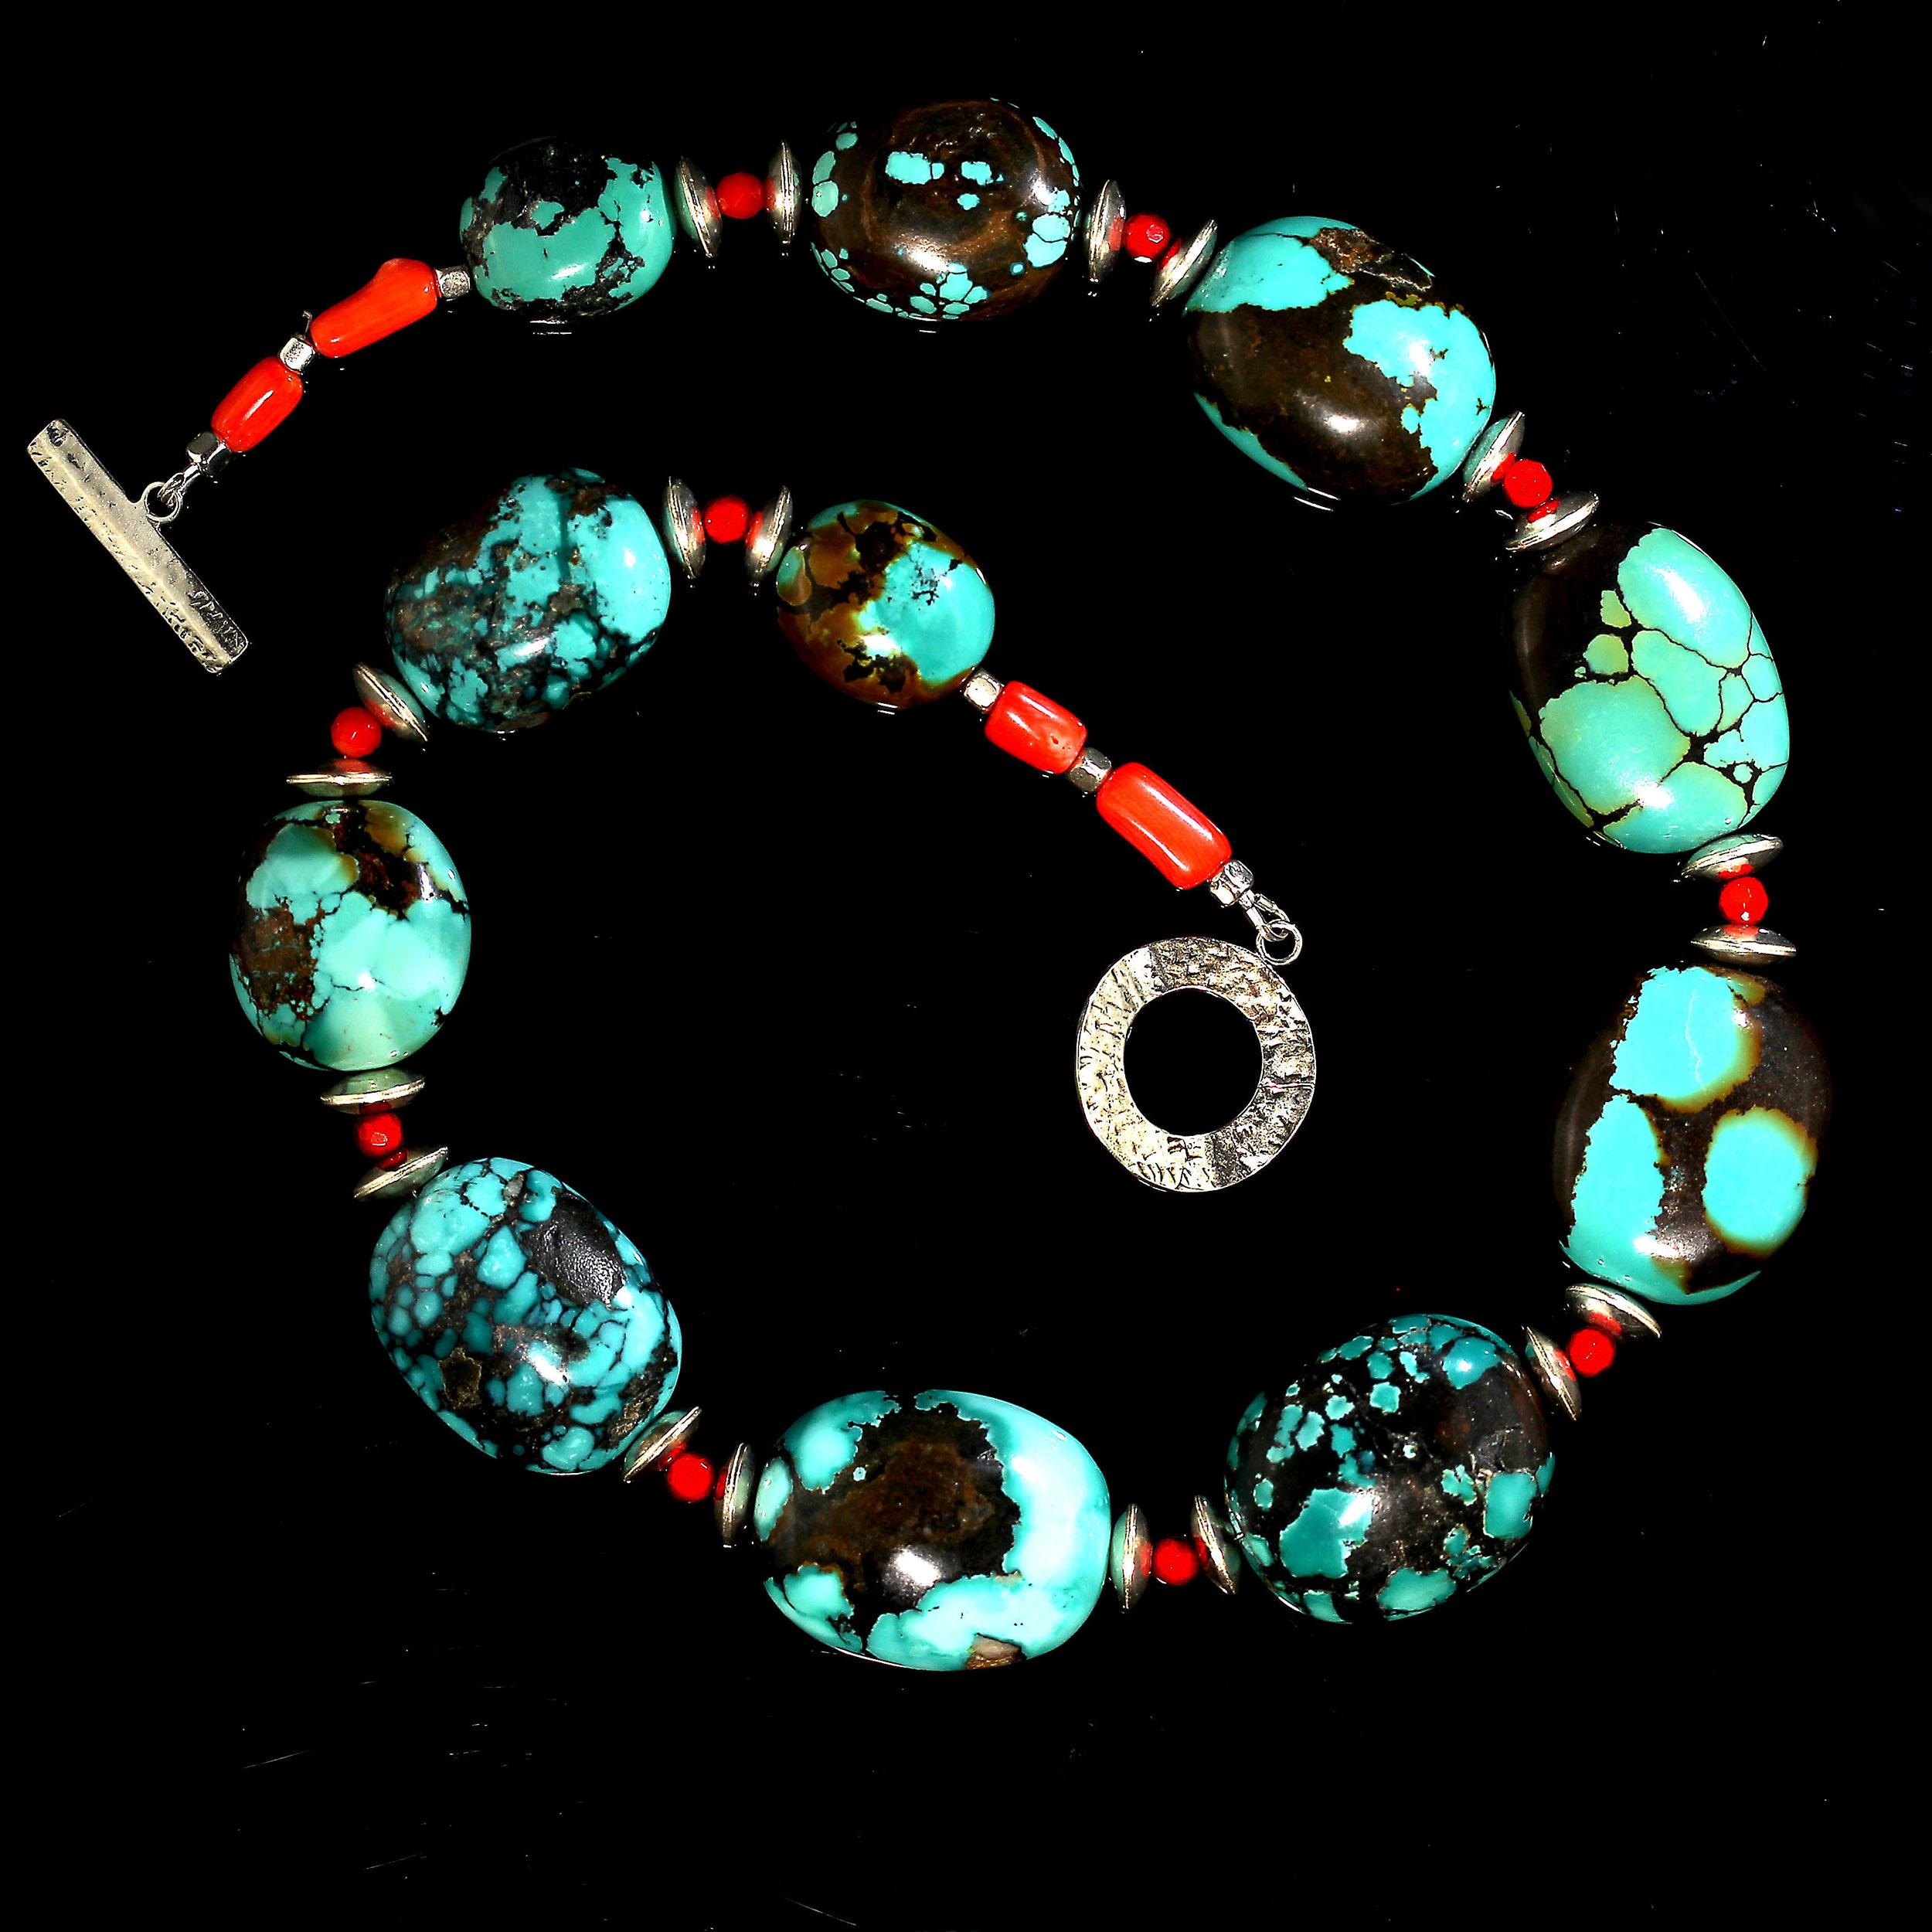 Artisan AJD Graduated Hubei Turquoise Nugget Necklace with Orange & Silver Accents